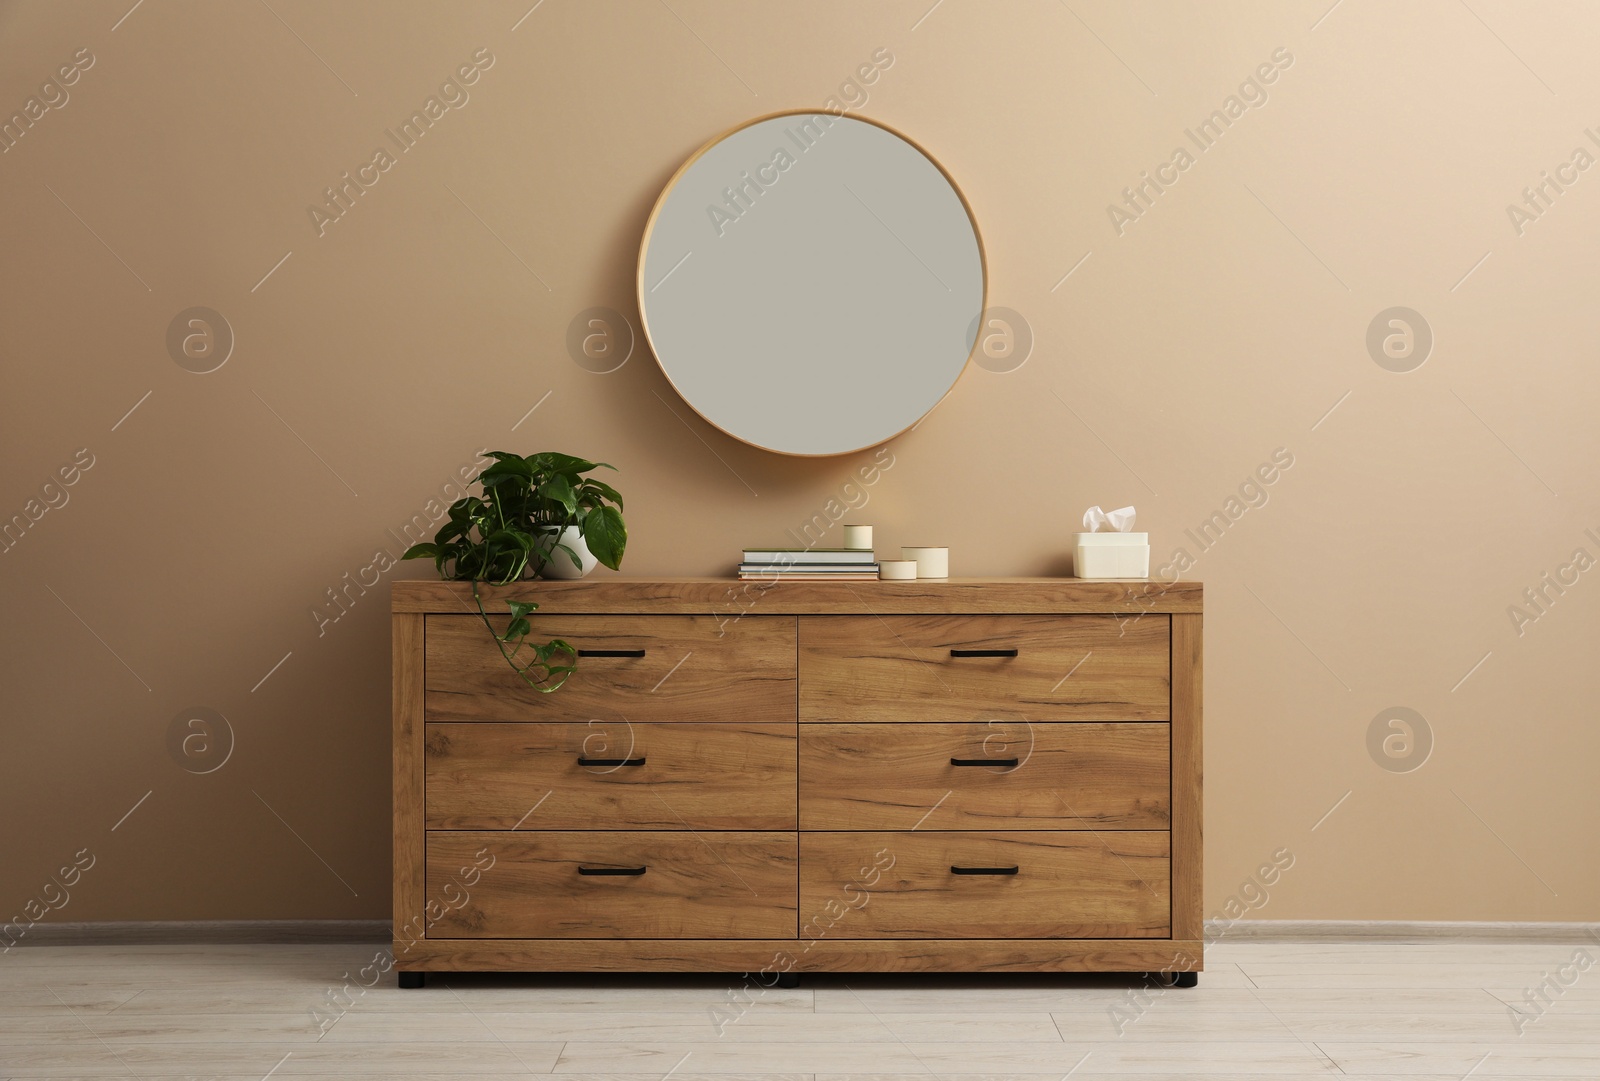 Photo of Wooden stylish chest of drawers near light brown wall with round mirror